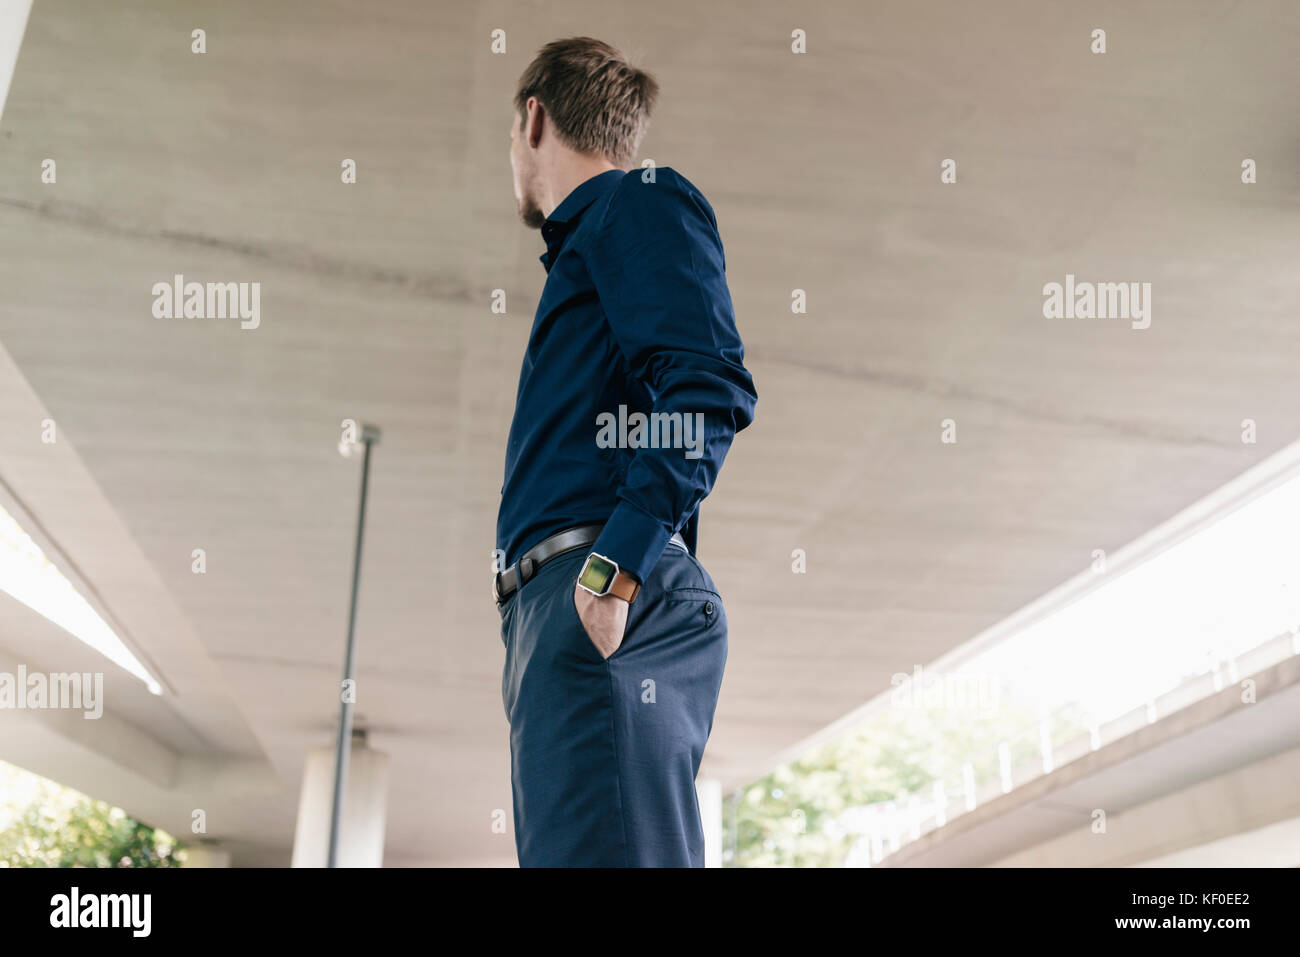 Businessman standing at underpass looking around Stock Photo